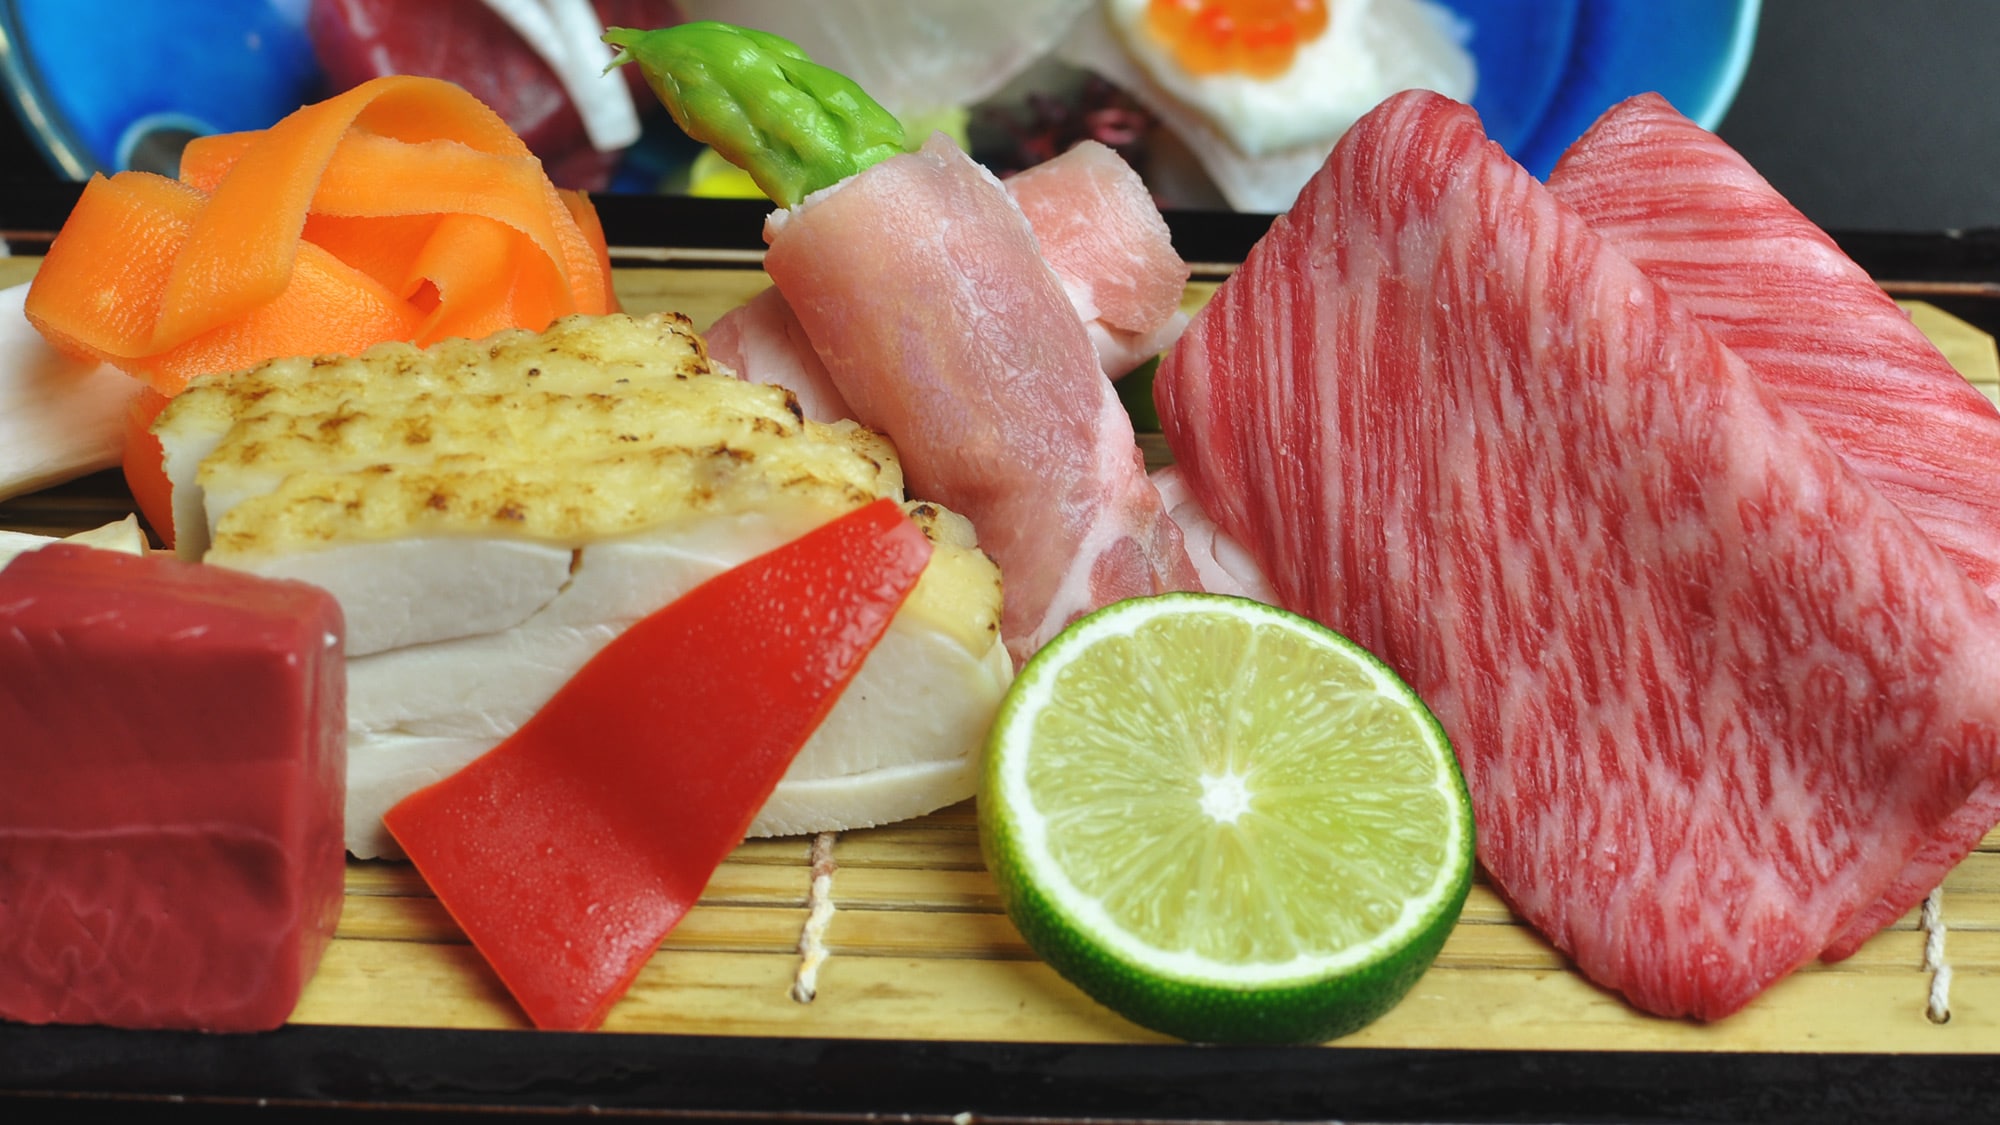 ★ Bamboo steamed compared to eating 3 types of Kobe beef, Awaji mochi pork, and Tamba chicken